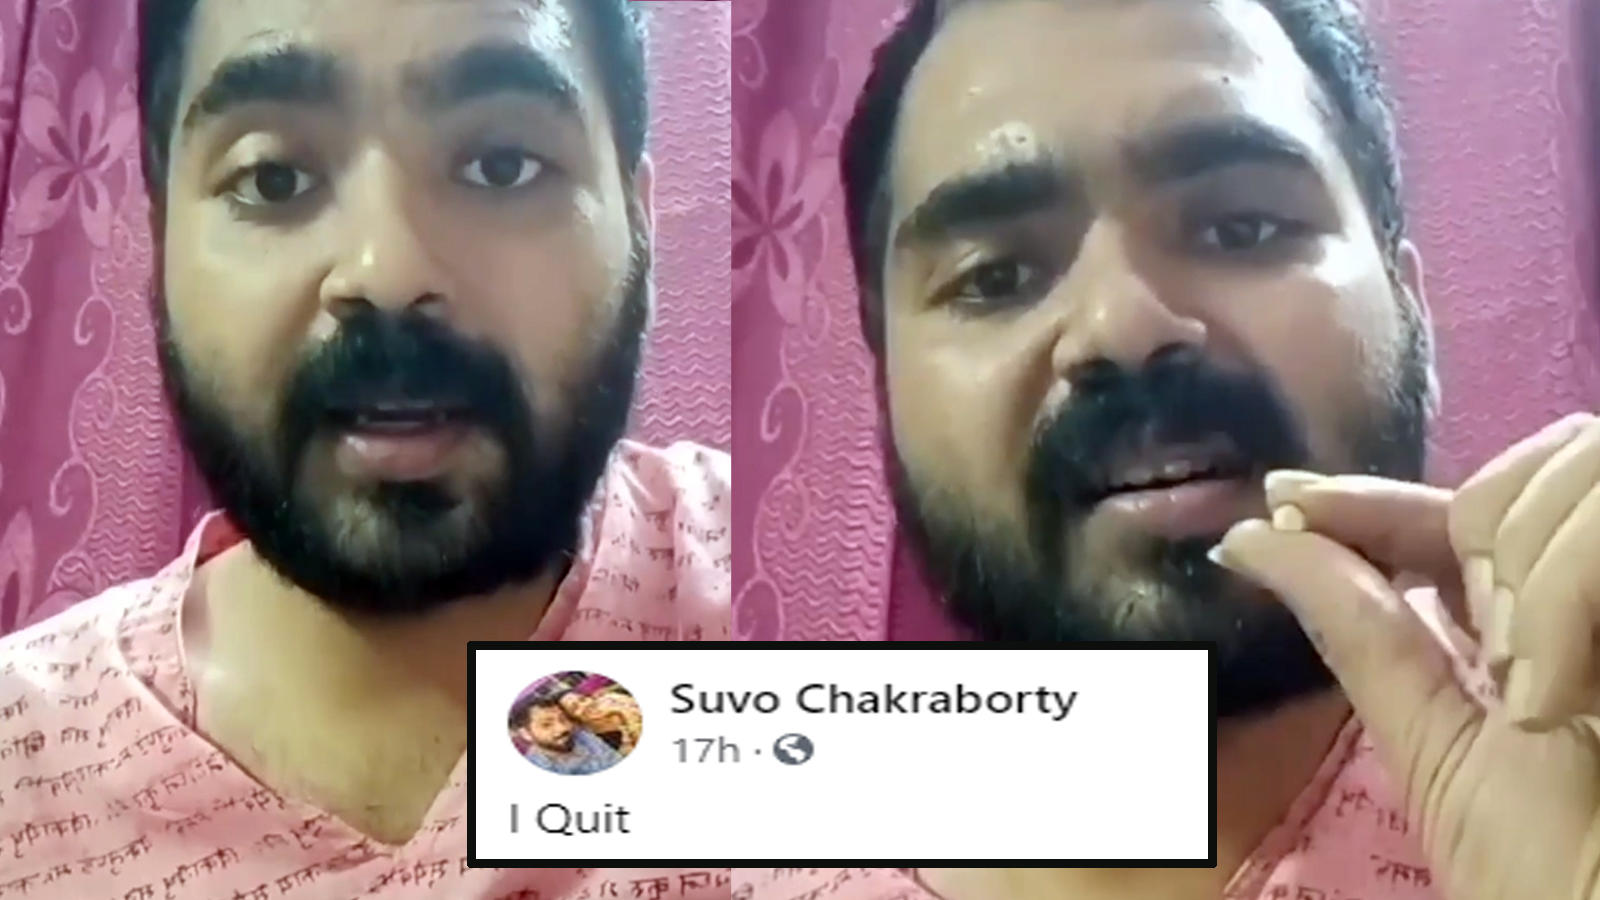 I quit&#39;: &#39;Mangal Chandi&#39; actor Suvo Chakraborty threatens to end his life  on Facebook Live, police rush to save him | Bangla Movie News - Times of  India